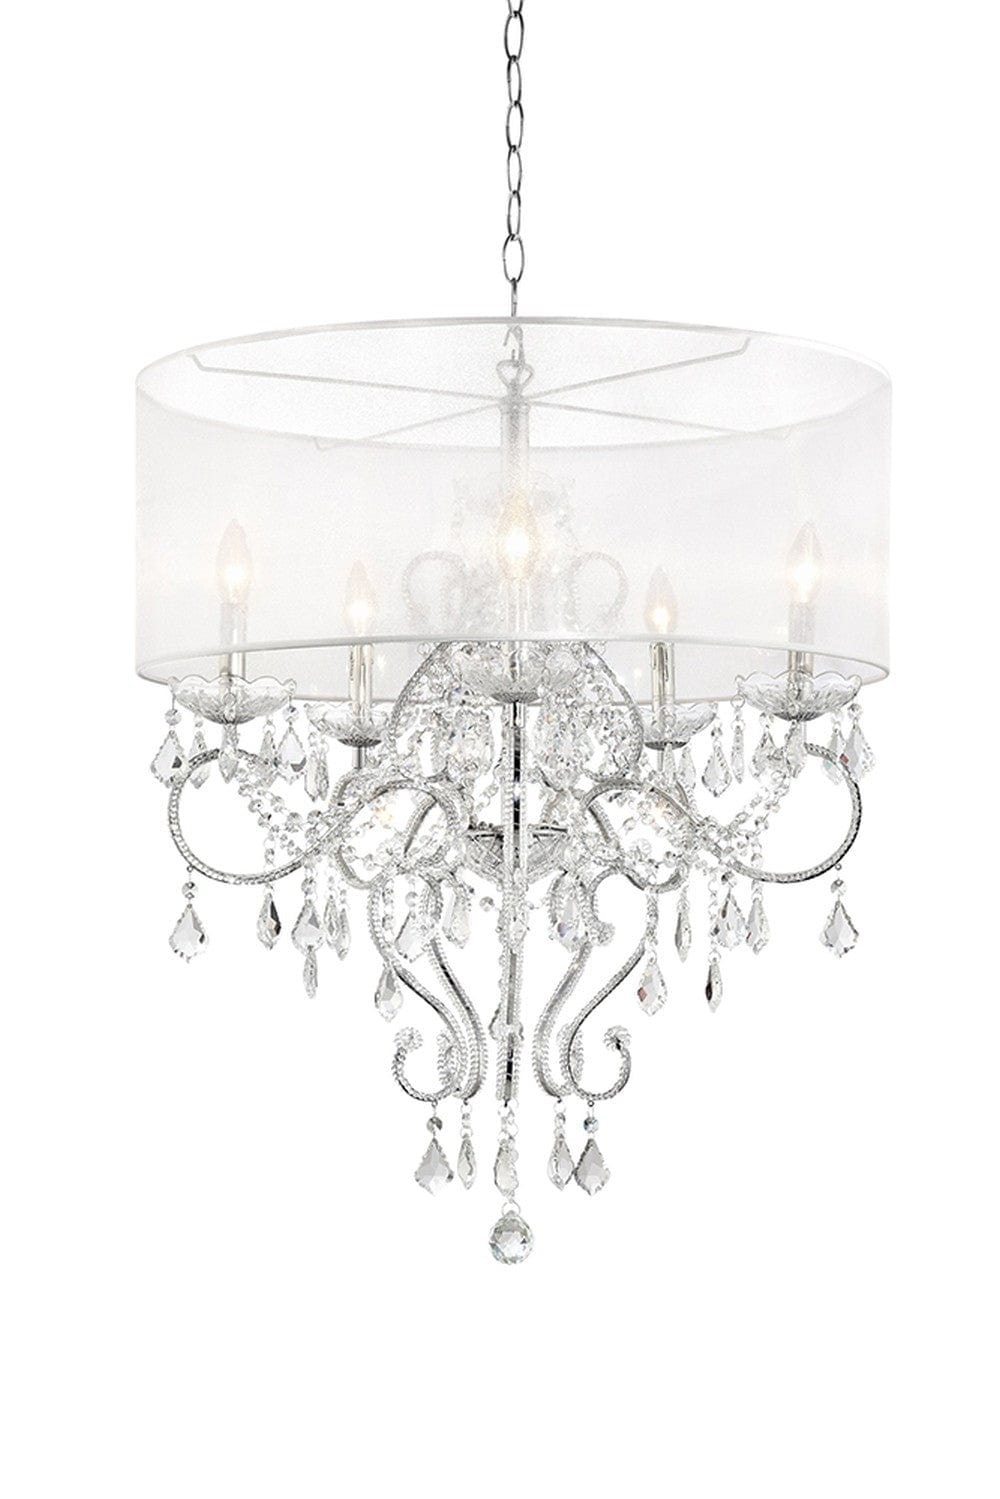 Glam Silver Faux Crystal Hanging Chandelier With See throughout Shade